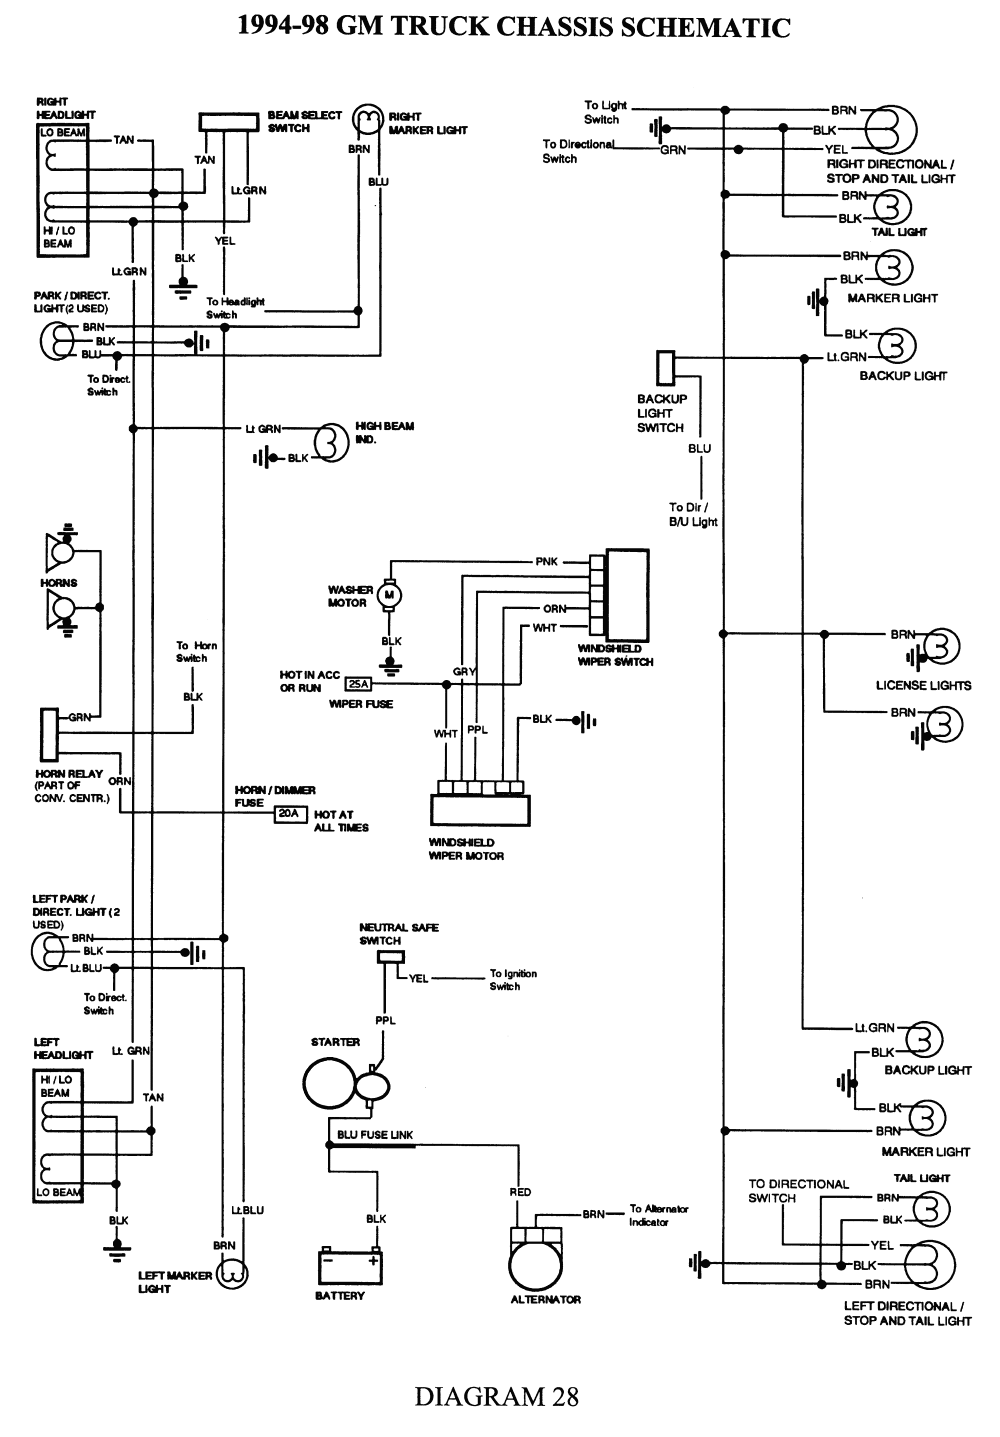 Wiring Diagram For Light Switch